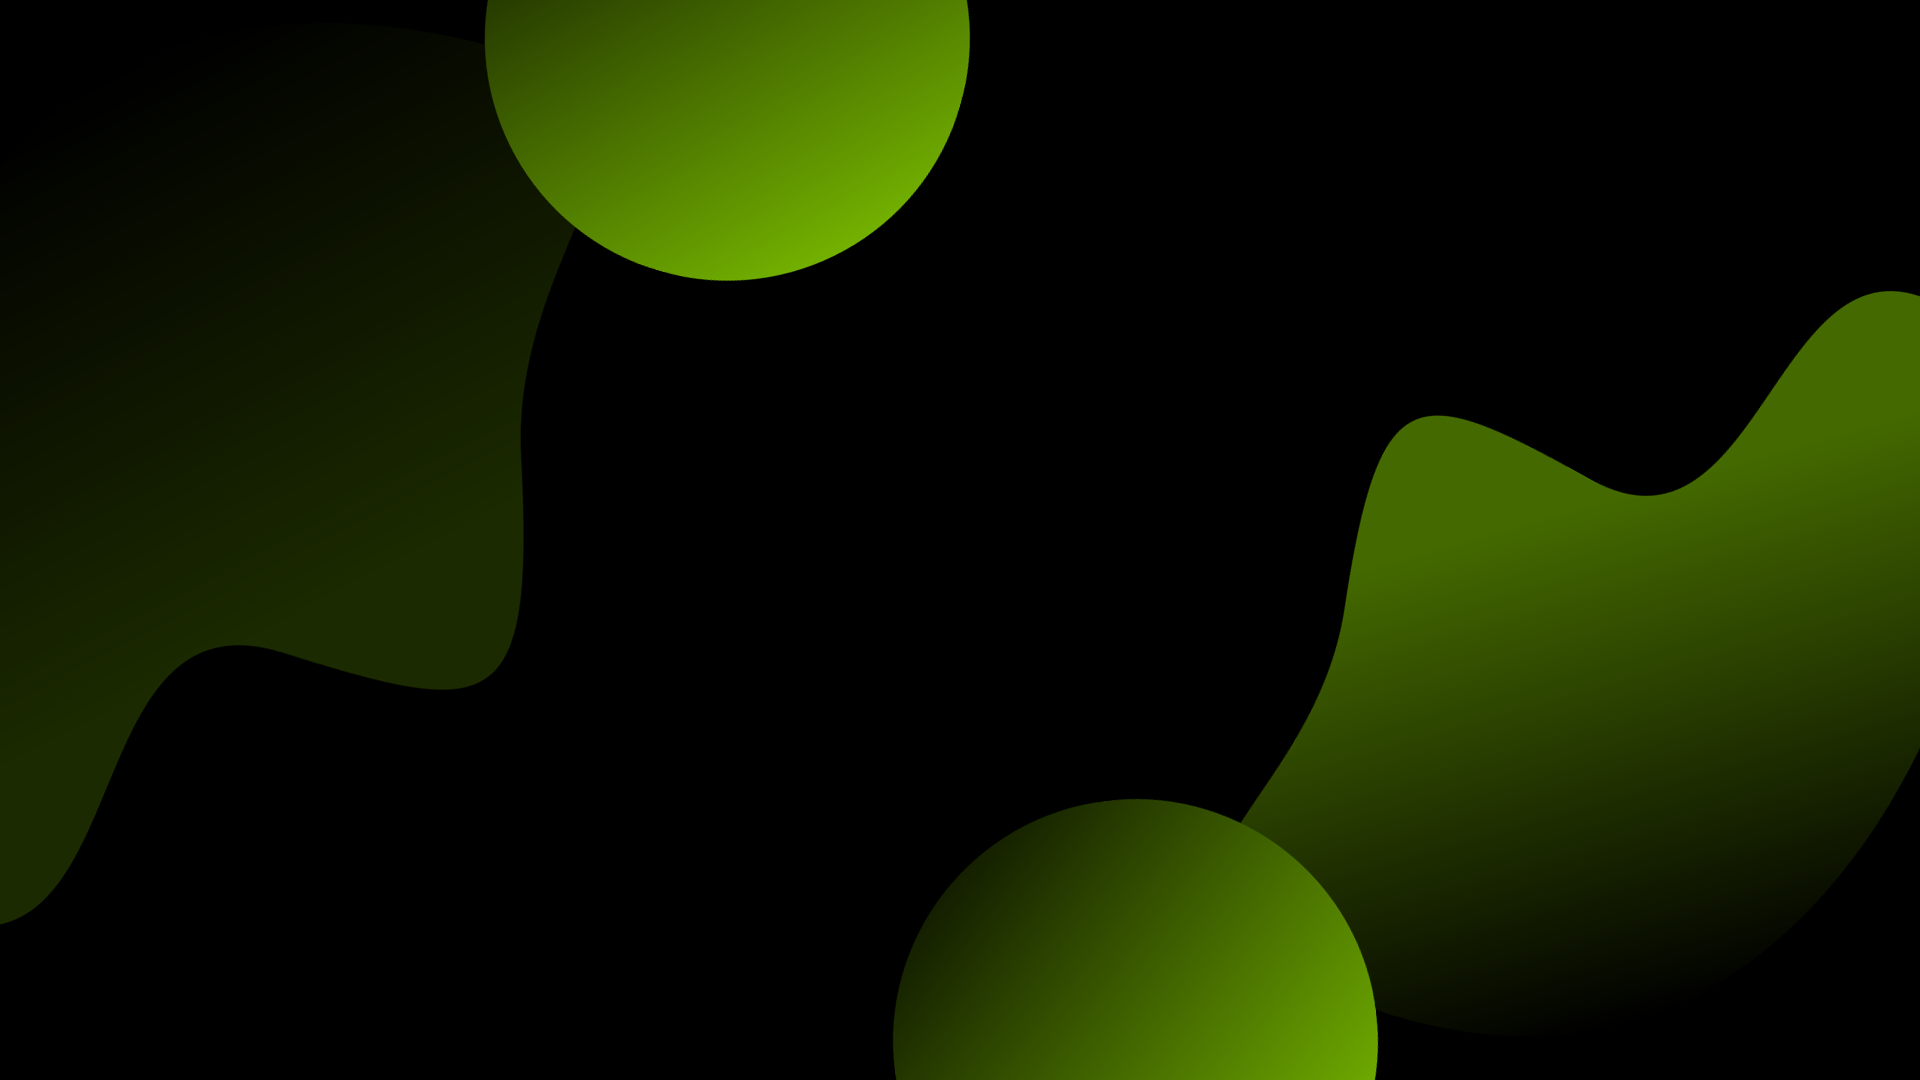 General 1920x1080 material minimal shapes light green minimalism simple background